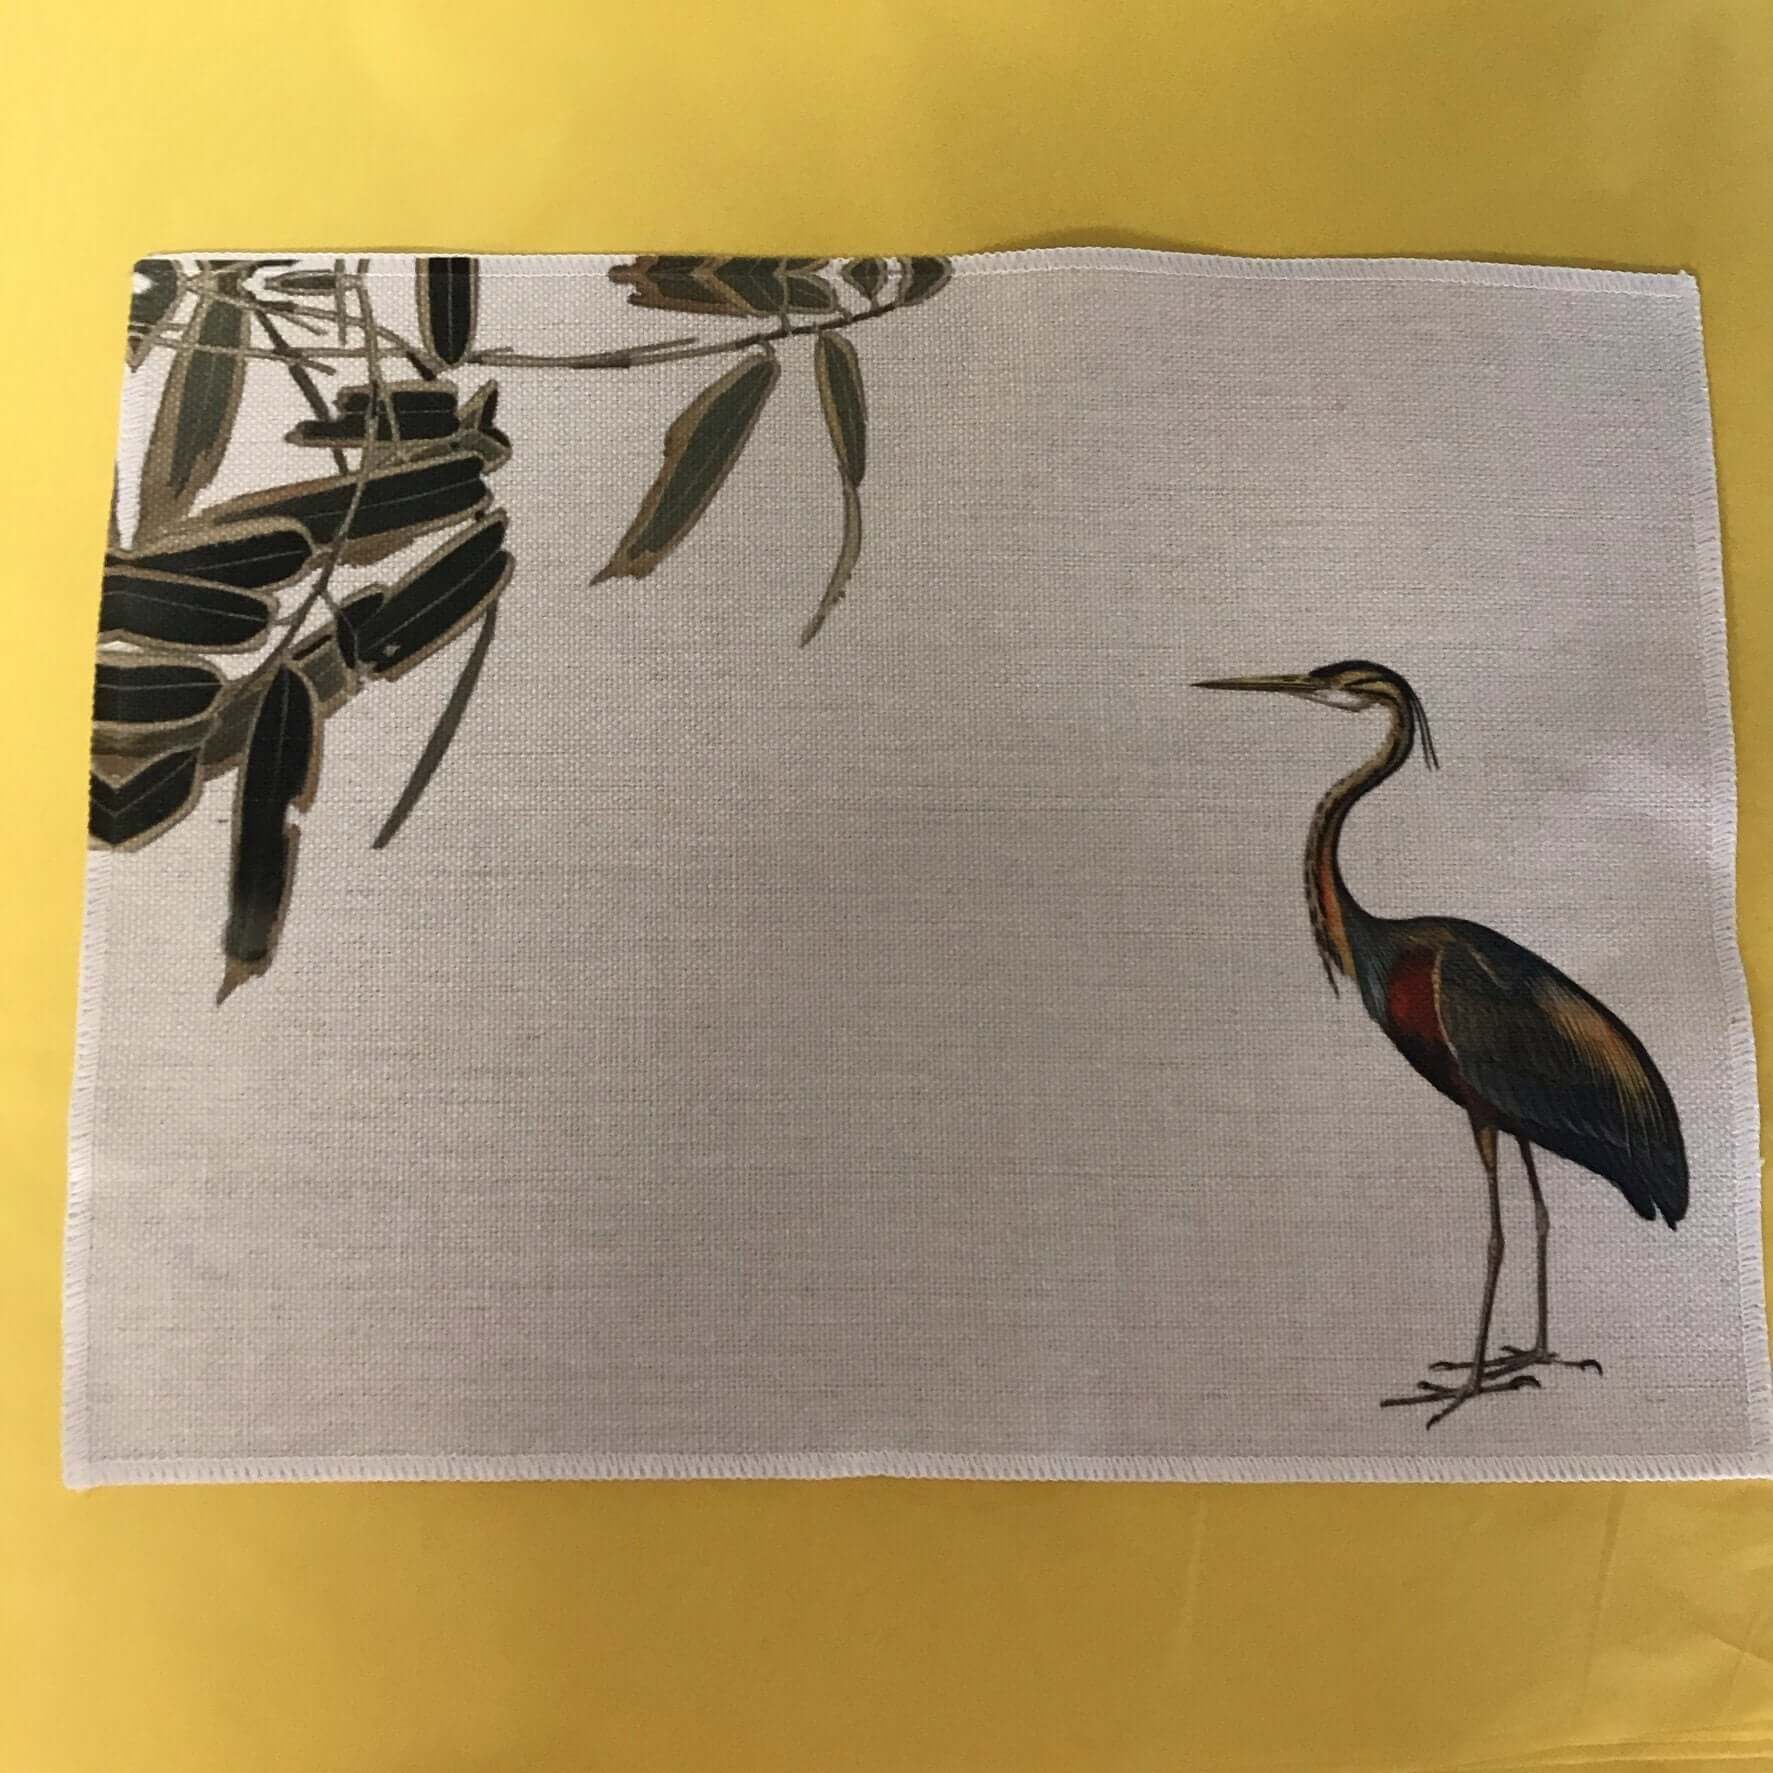 Heron Placemats (Set of Four) Placemats Mustard and Gray Ltd Shropshire UK